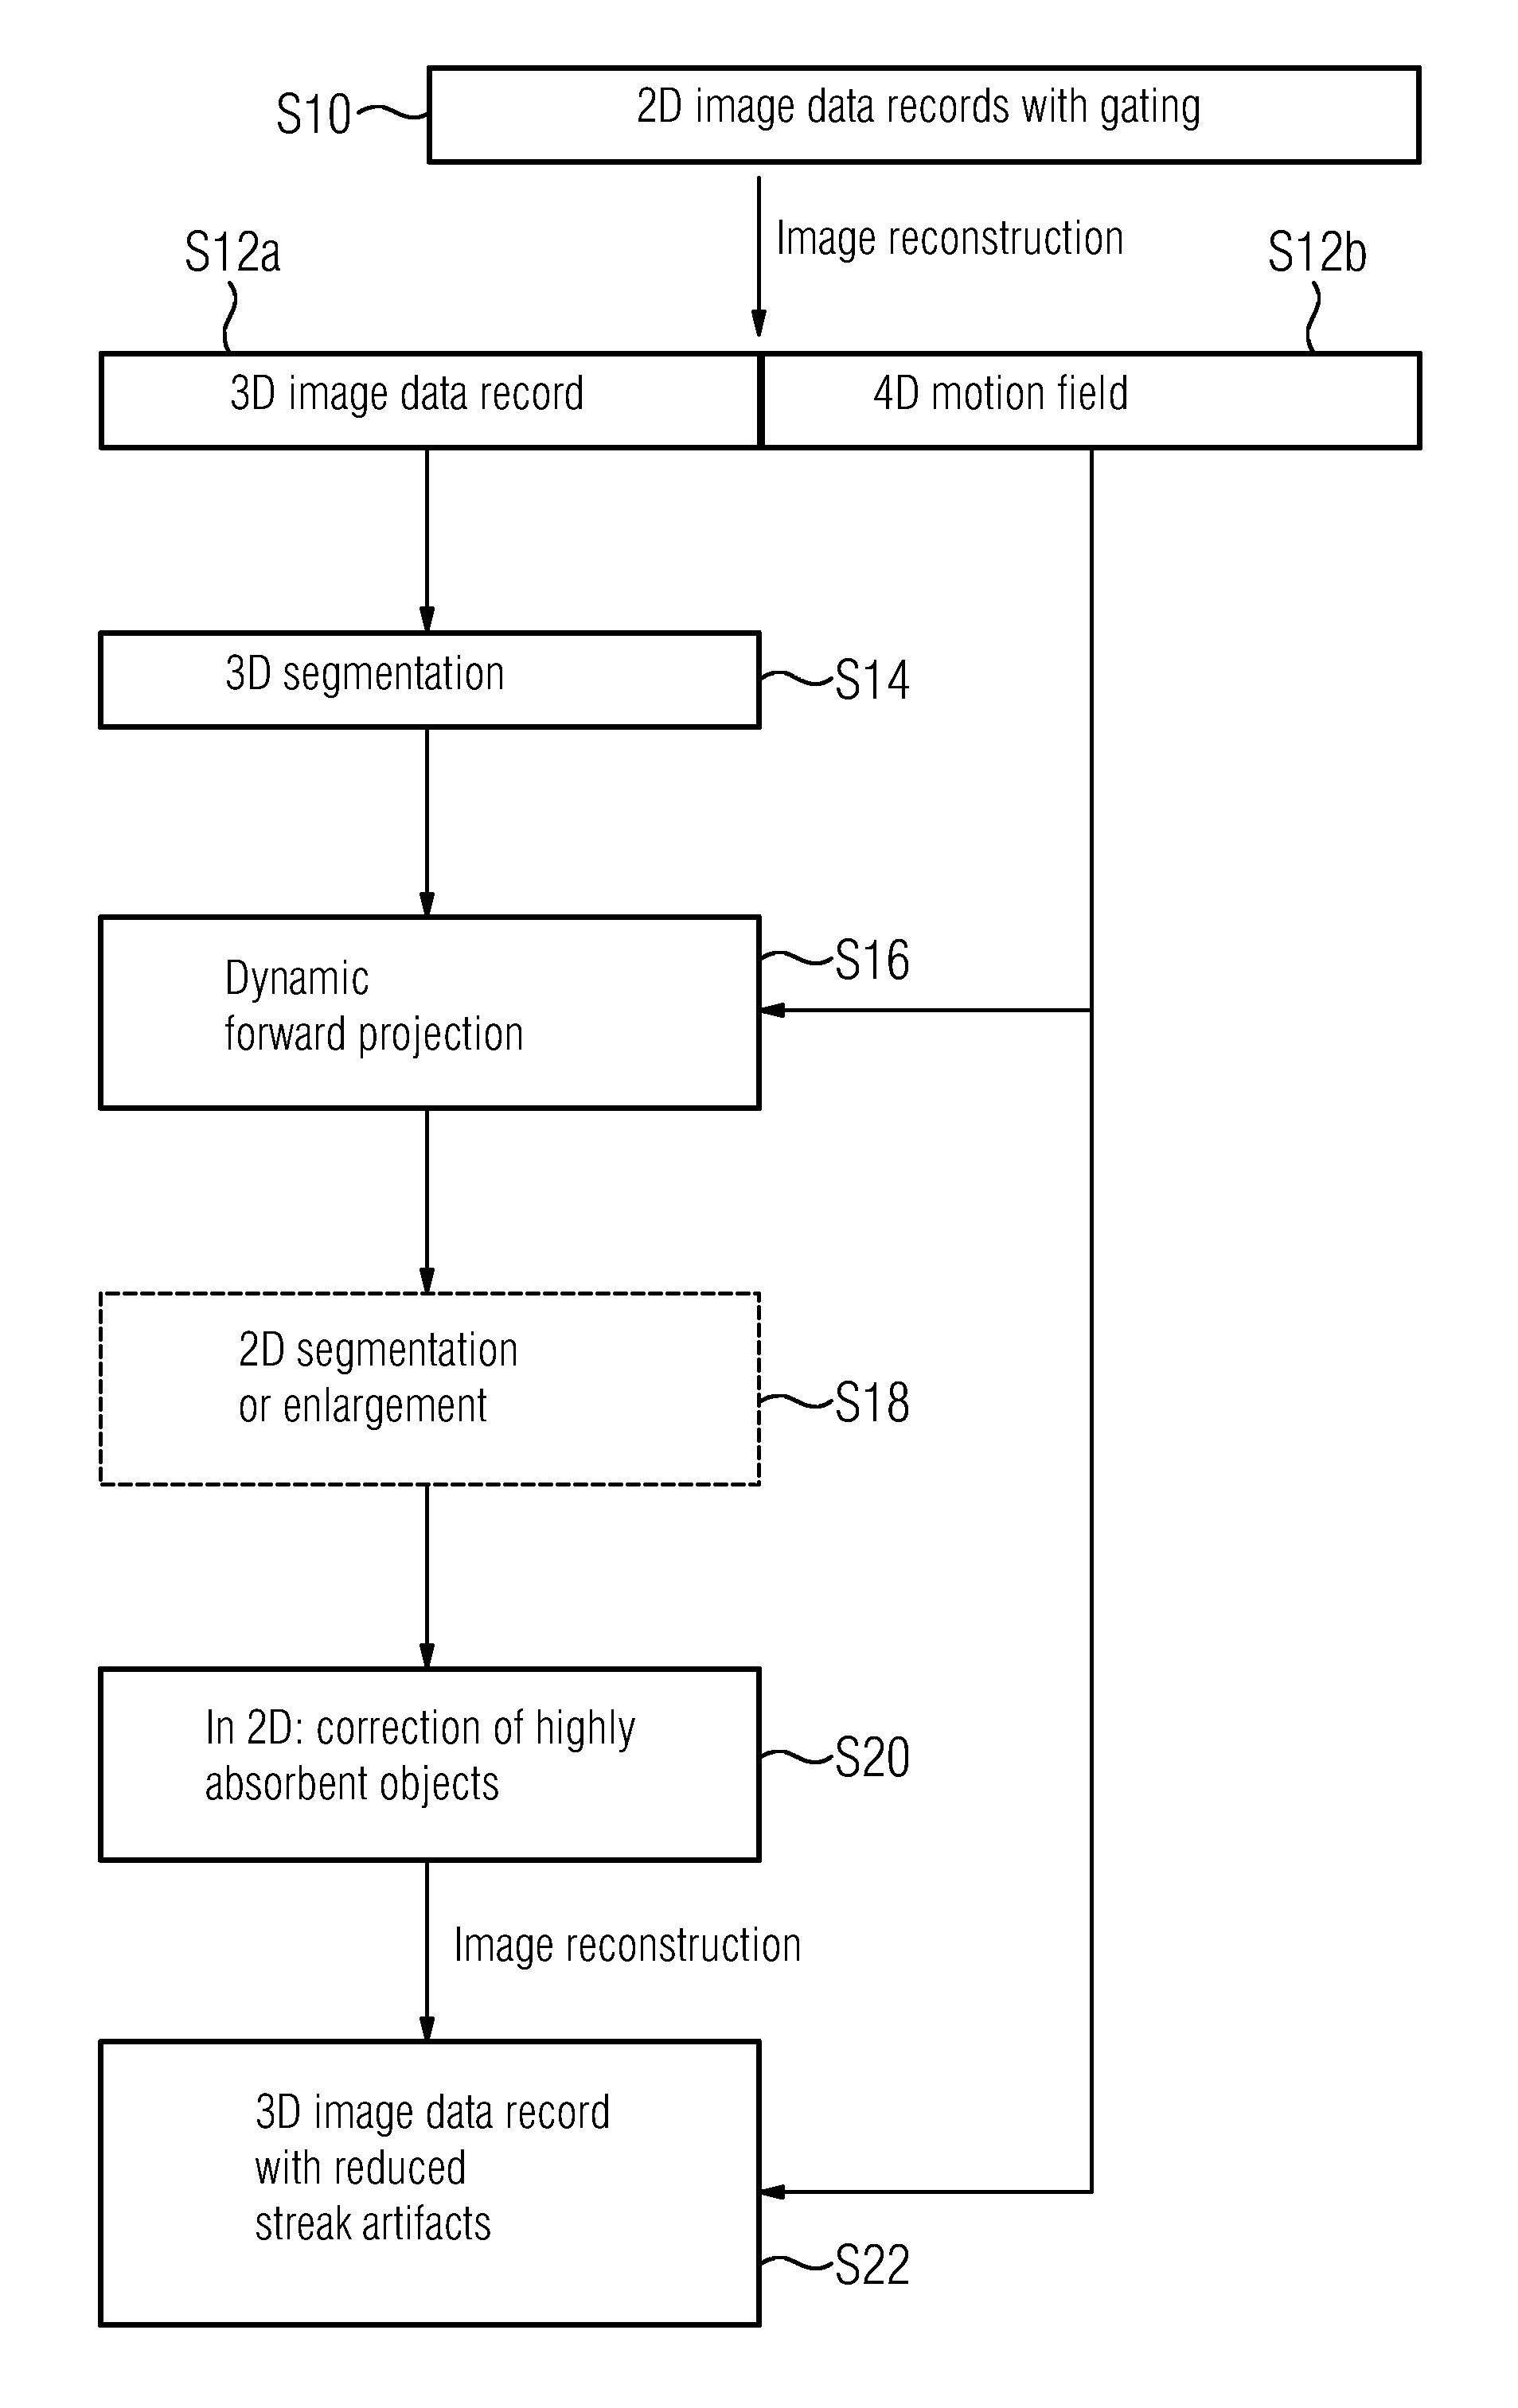 Method for supplying a 3D x-ray image data record for a moving object with highly absorbent material